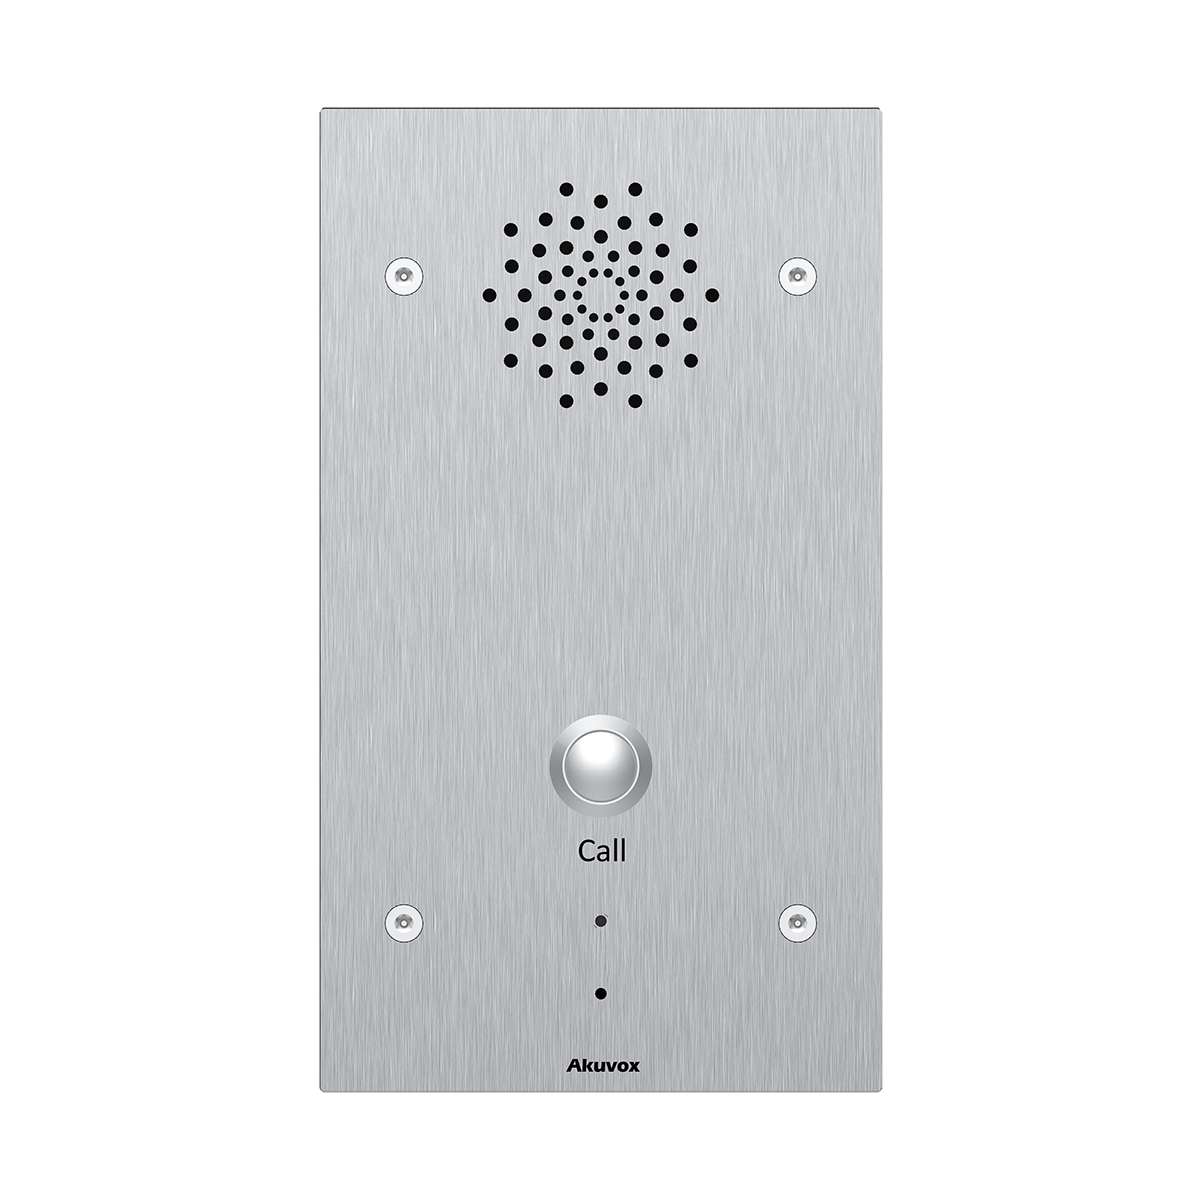 Akuvox TFE E21A Main Body In-Wall, vandal resistant